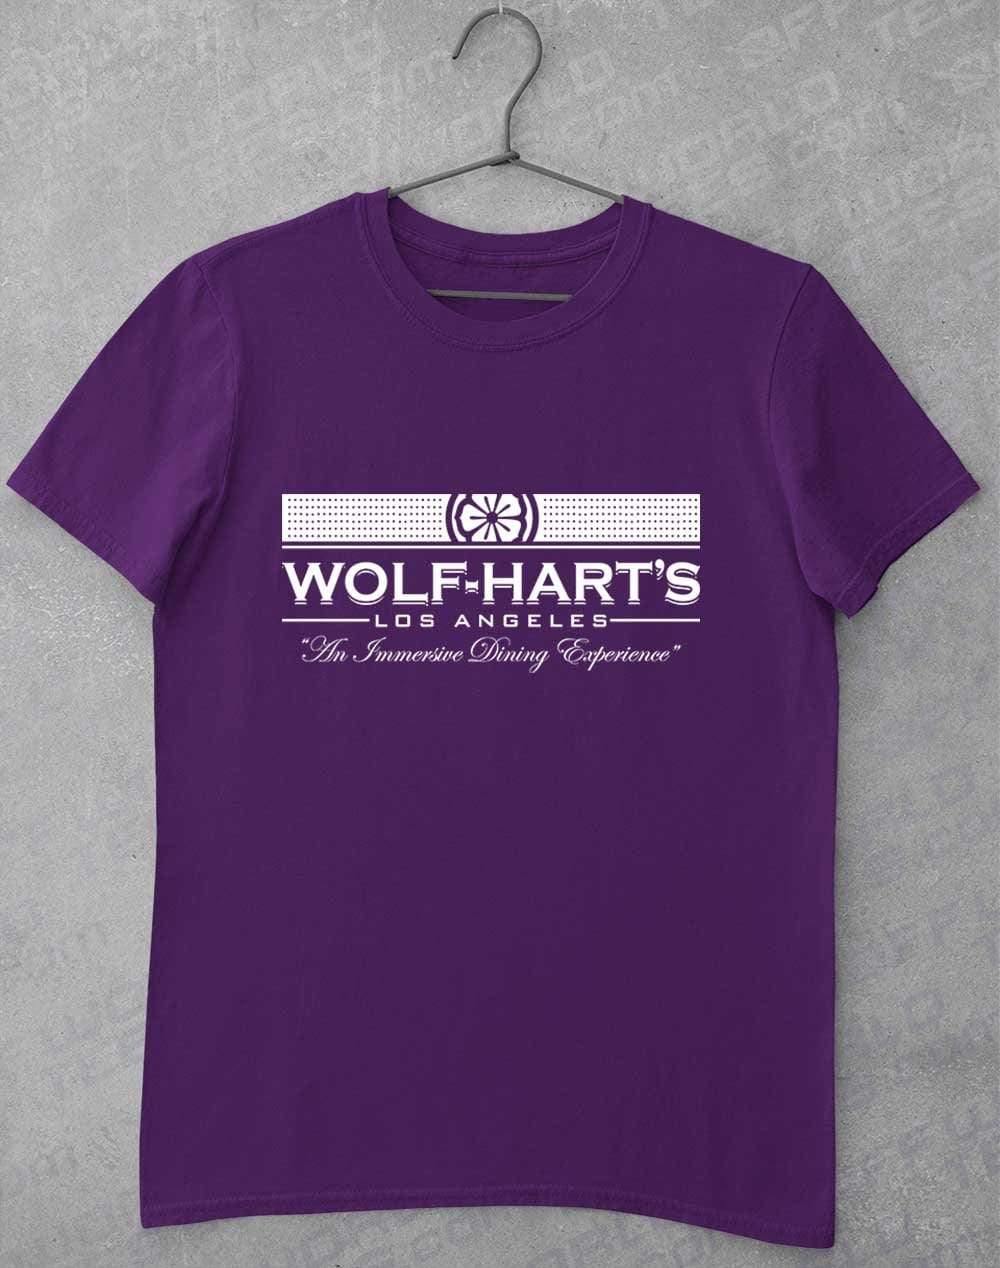 Wolf-Hart's Dining Experience T-Shirt S / Purple  - Off World Tees